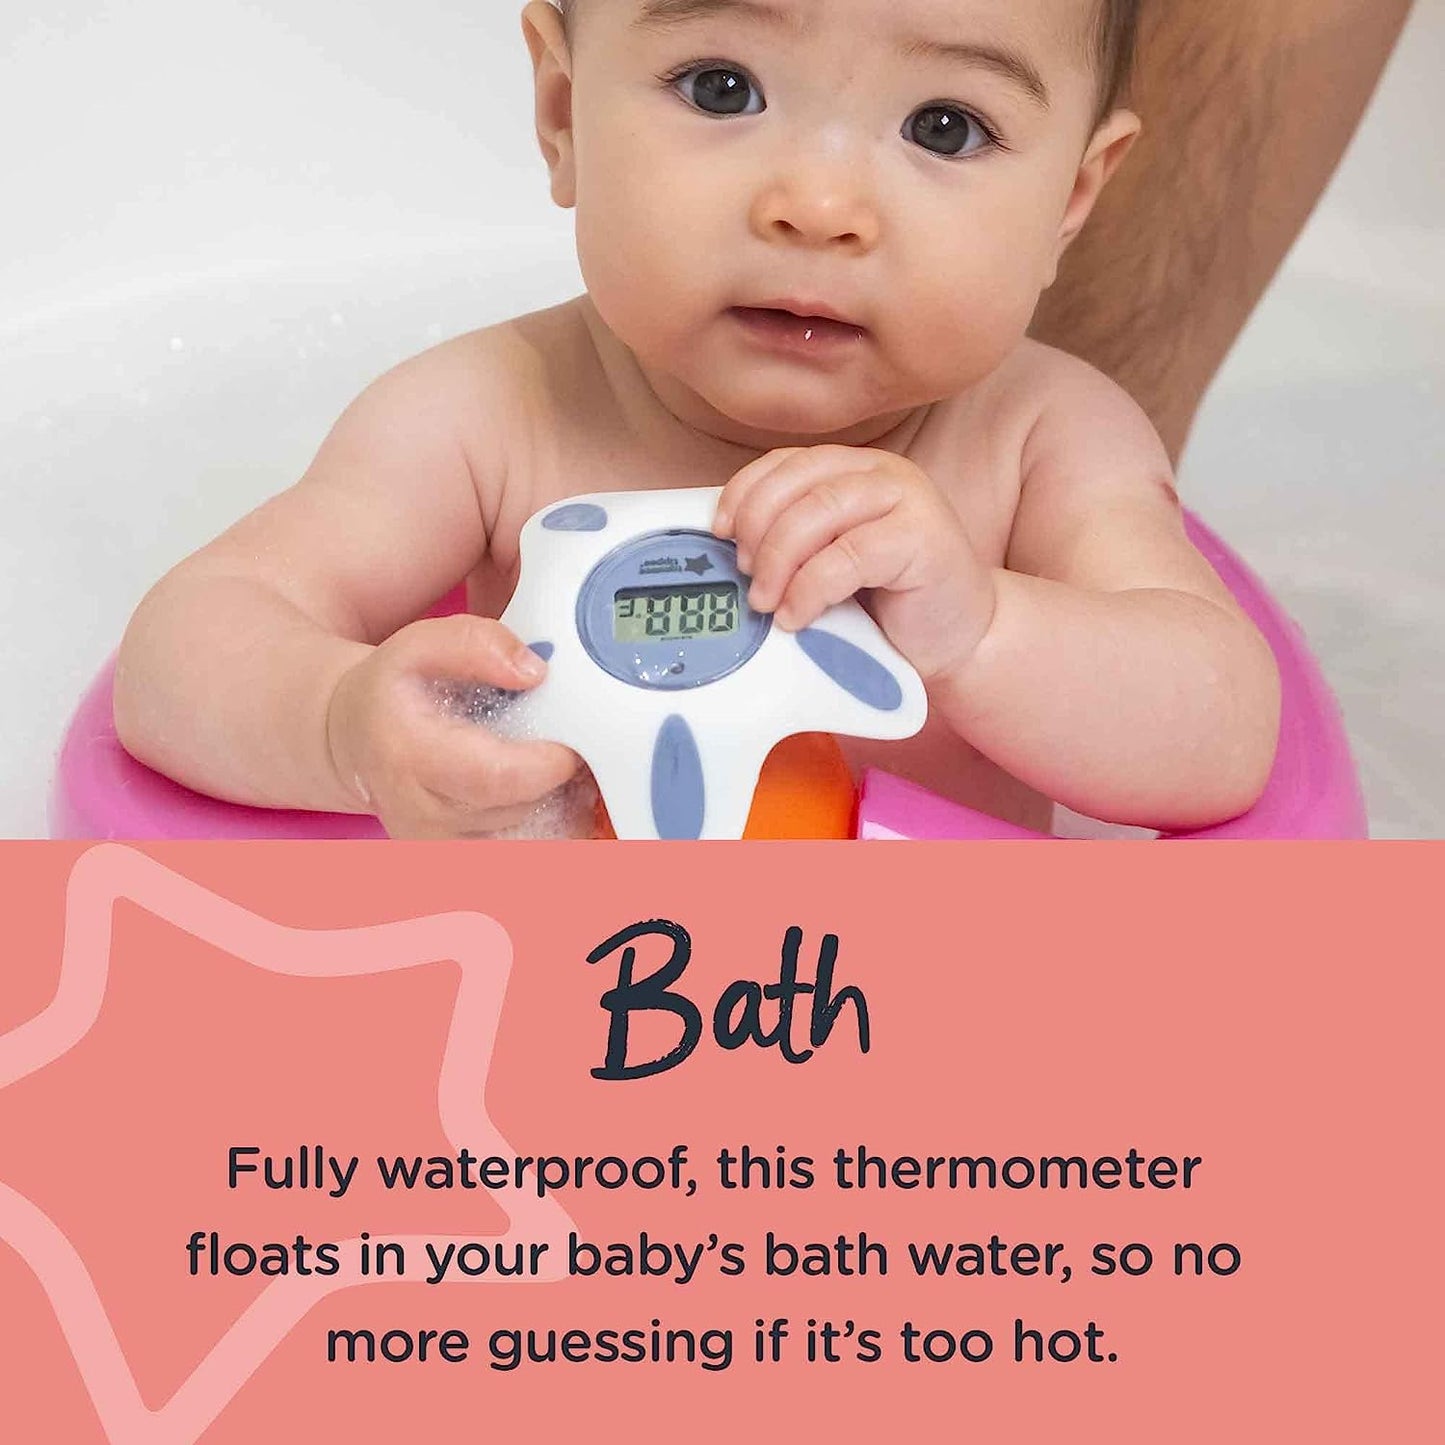 Tommee Tippee InBath Digital Bath and Room Thermometer